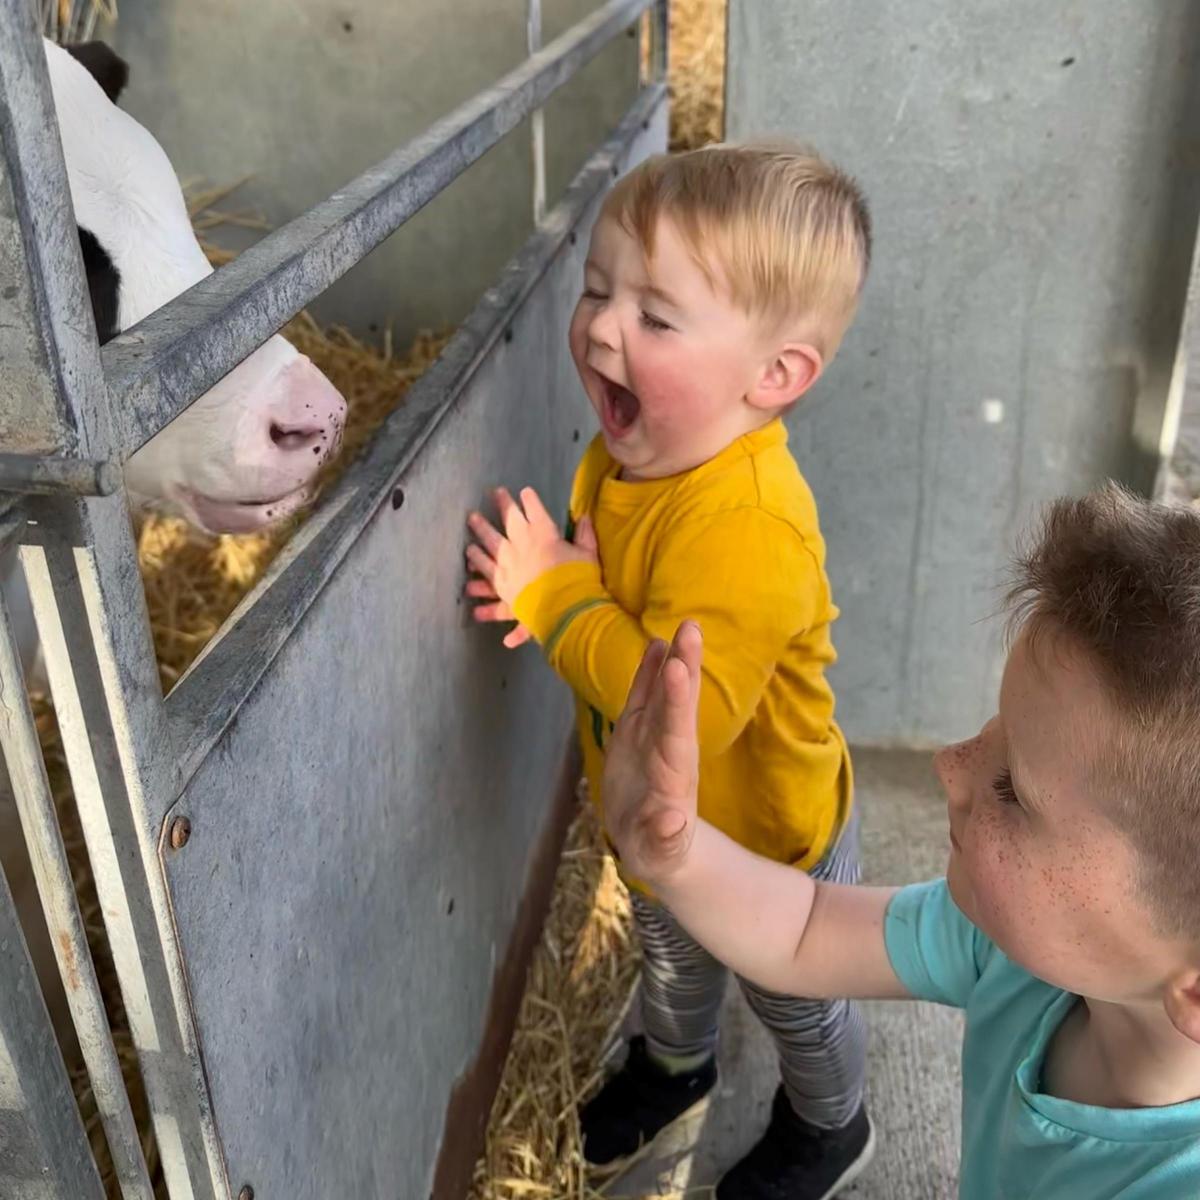 Gillian Weatherup - Can’t decide which one I love more but this is my little boy, Lane Weatherup (and big brother Hunter), helping at calf feeding time.